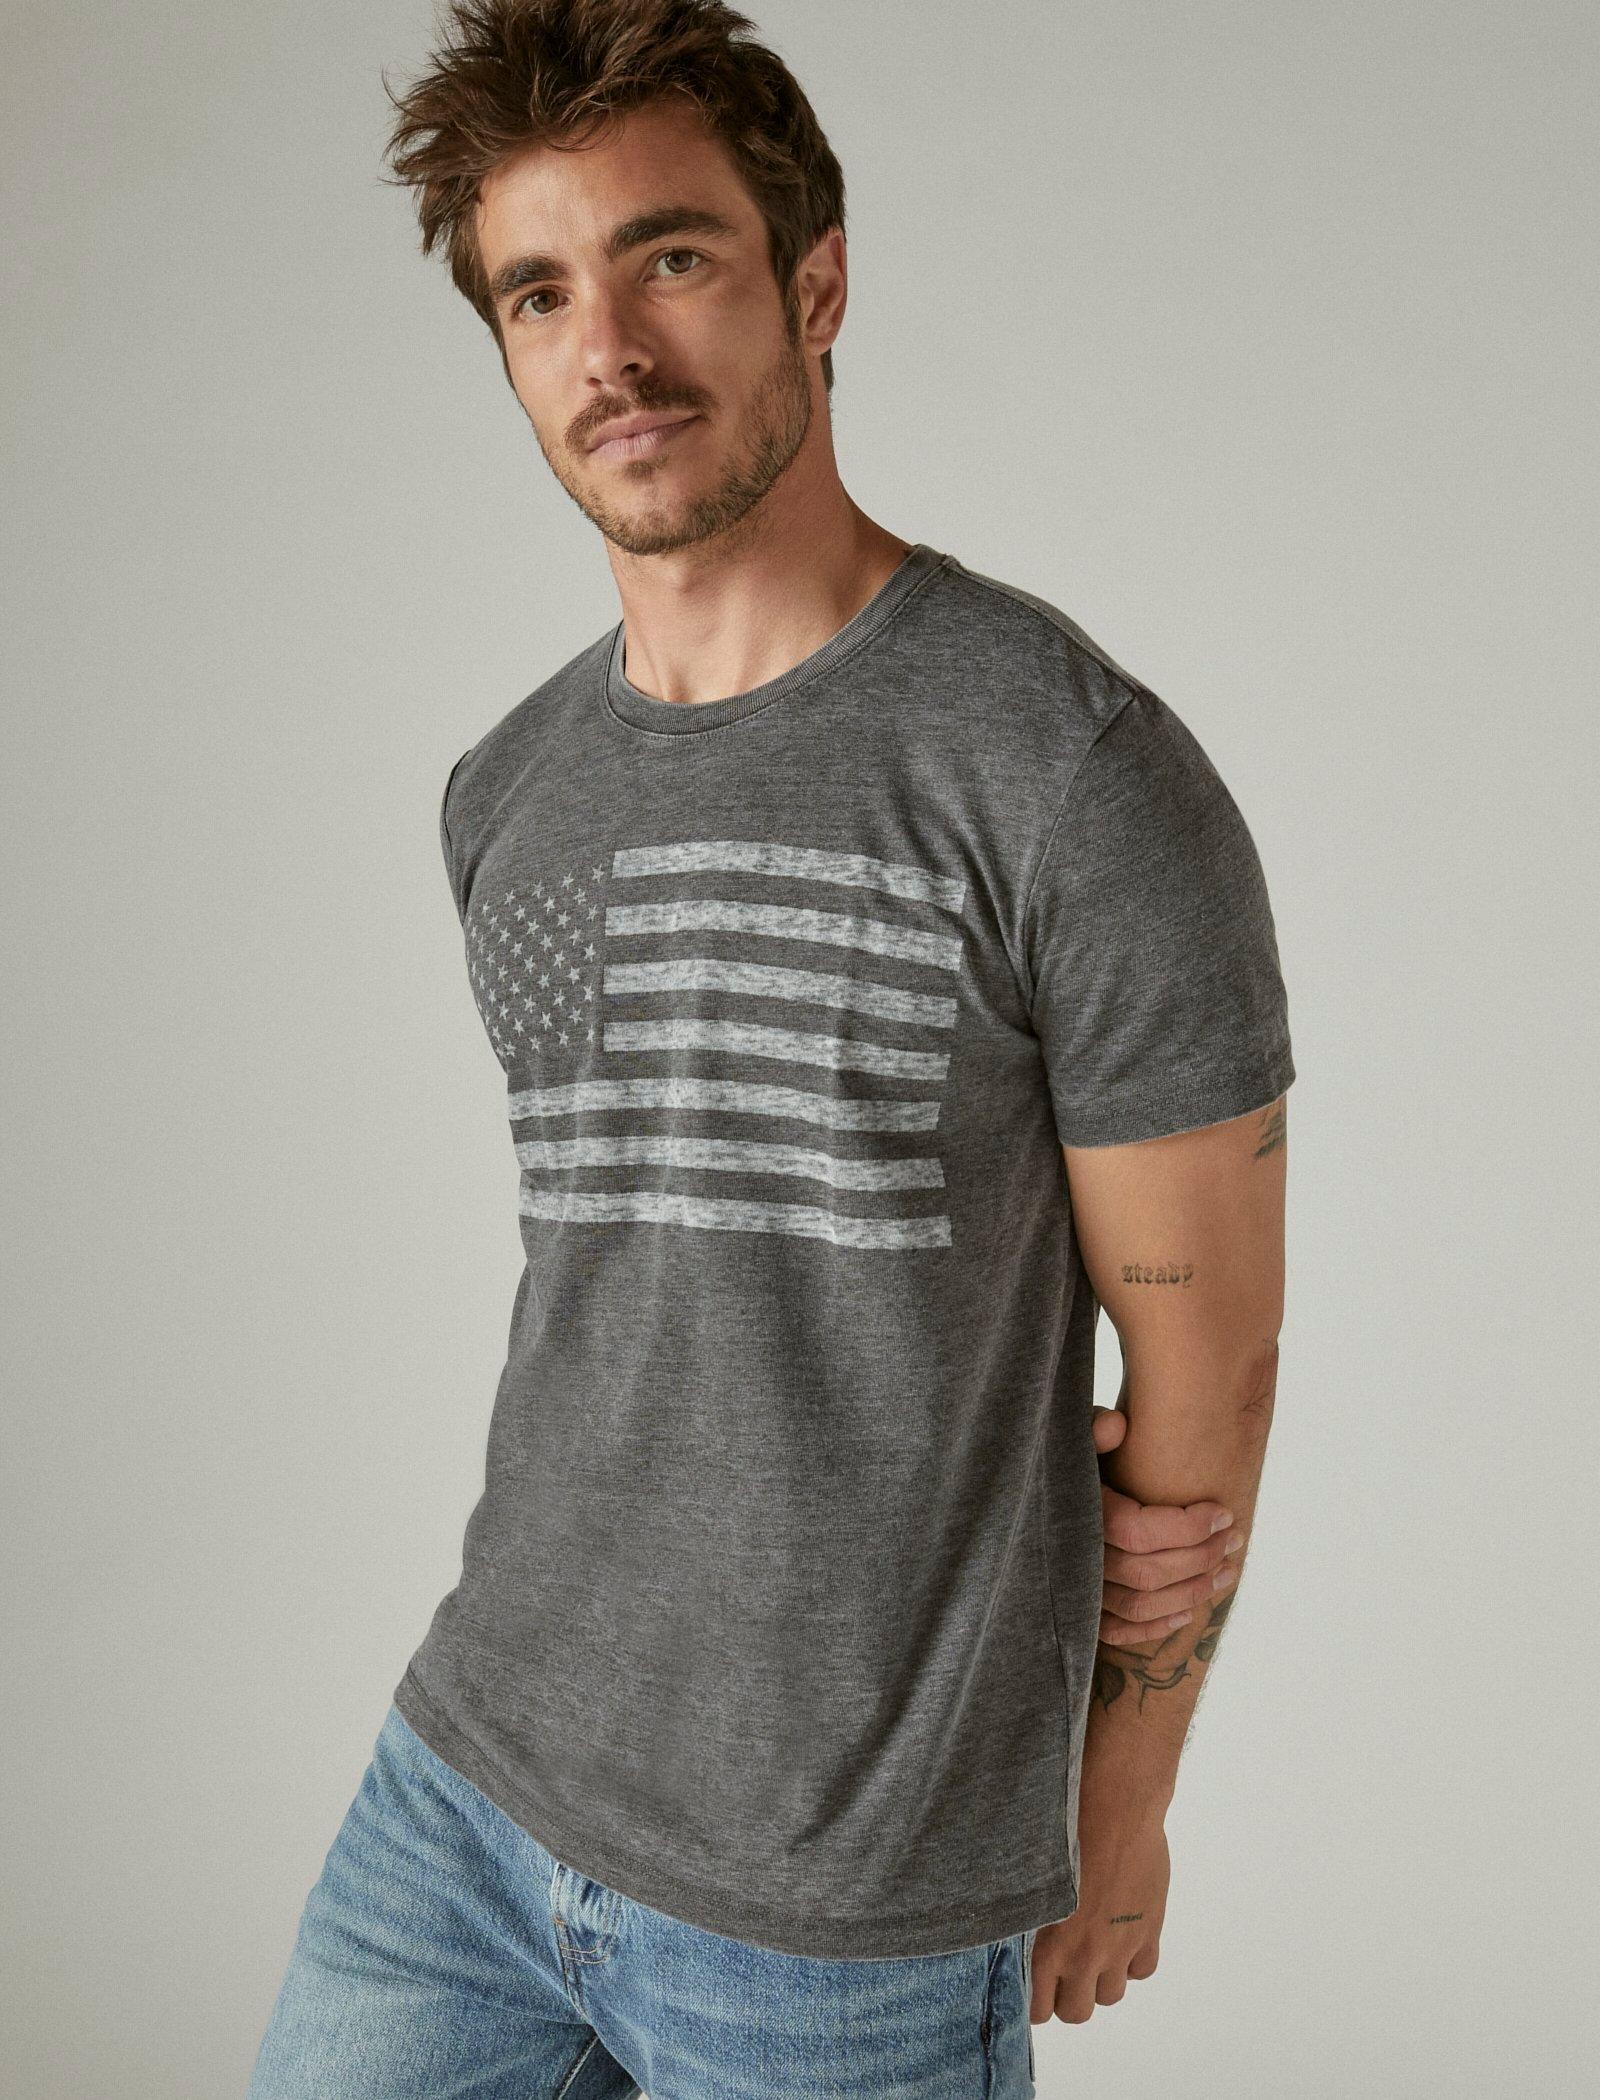 Lucky Brand Usa Flag Tee - Men's Clothing Tops Shirts Tee Graphic T Shirts Jet Black